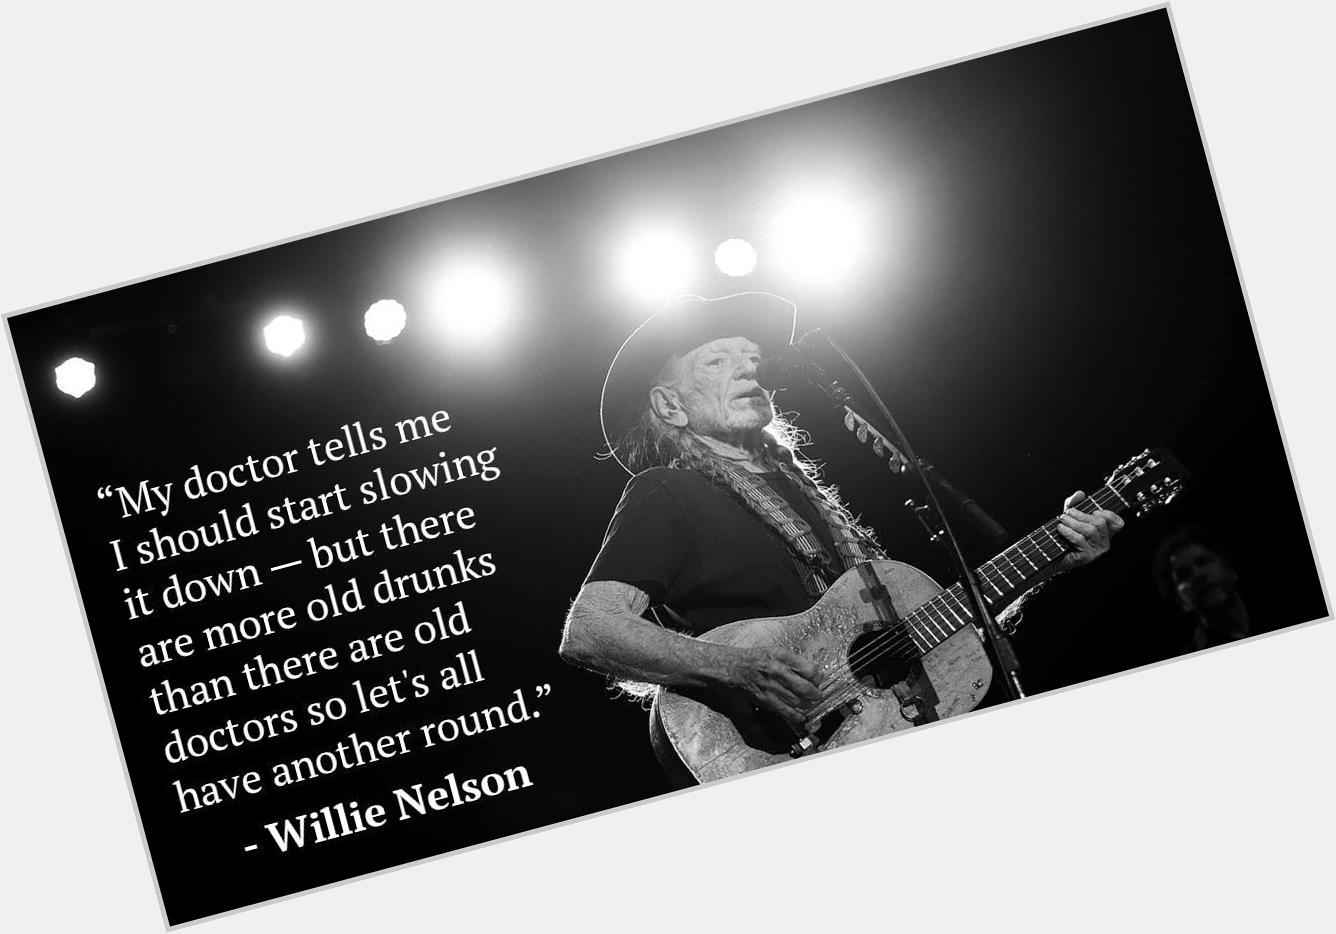 84 years and counting! Happy birthday, Willie.  